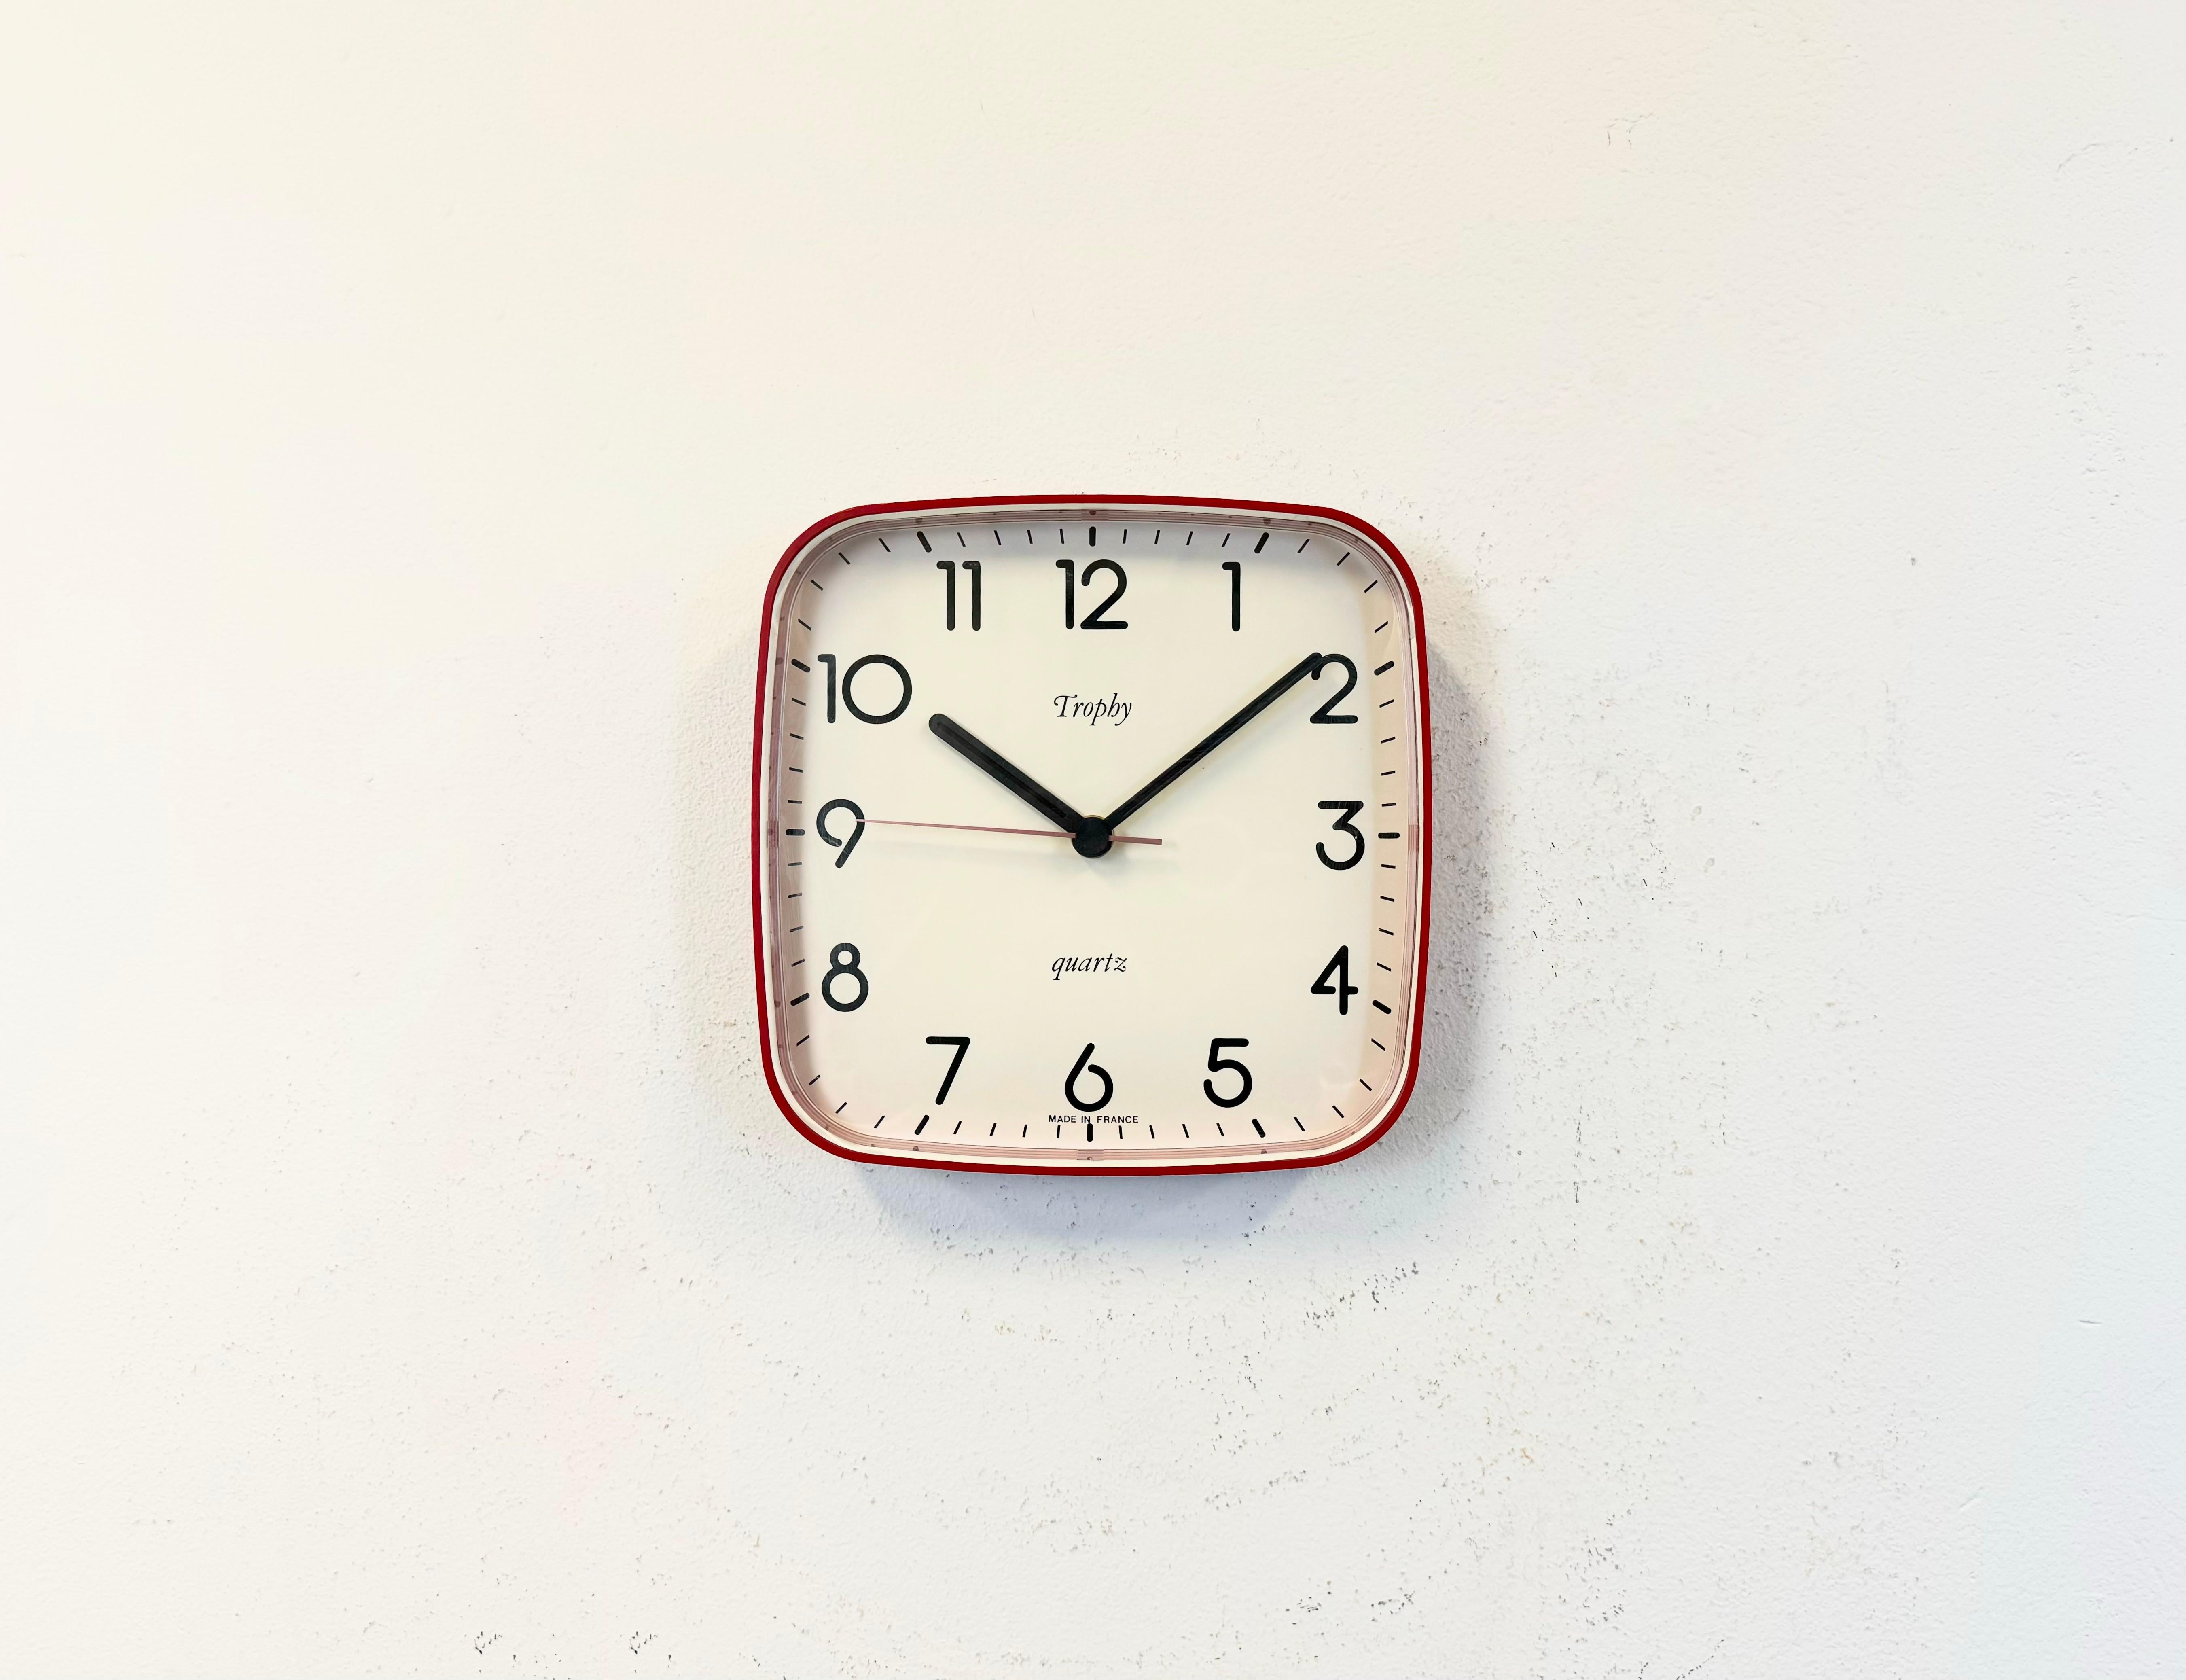 Vintage bakelite wall clock was made by Trophy in France during the 1990s. It features a red bakelite body and a plastic clear glass cover. The original clockwork works perfectly and requires one AA battery.
The weight is 0,3 kg.